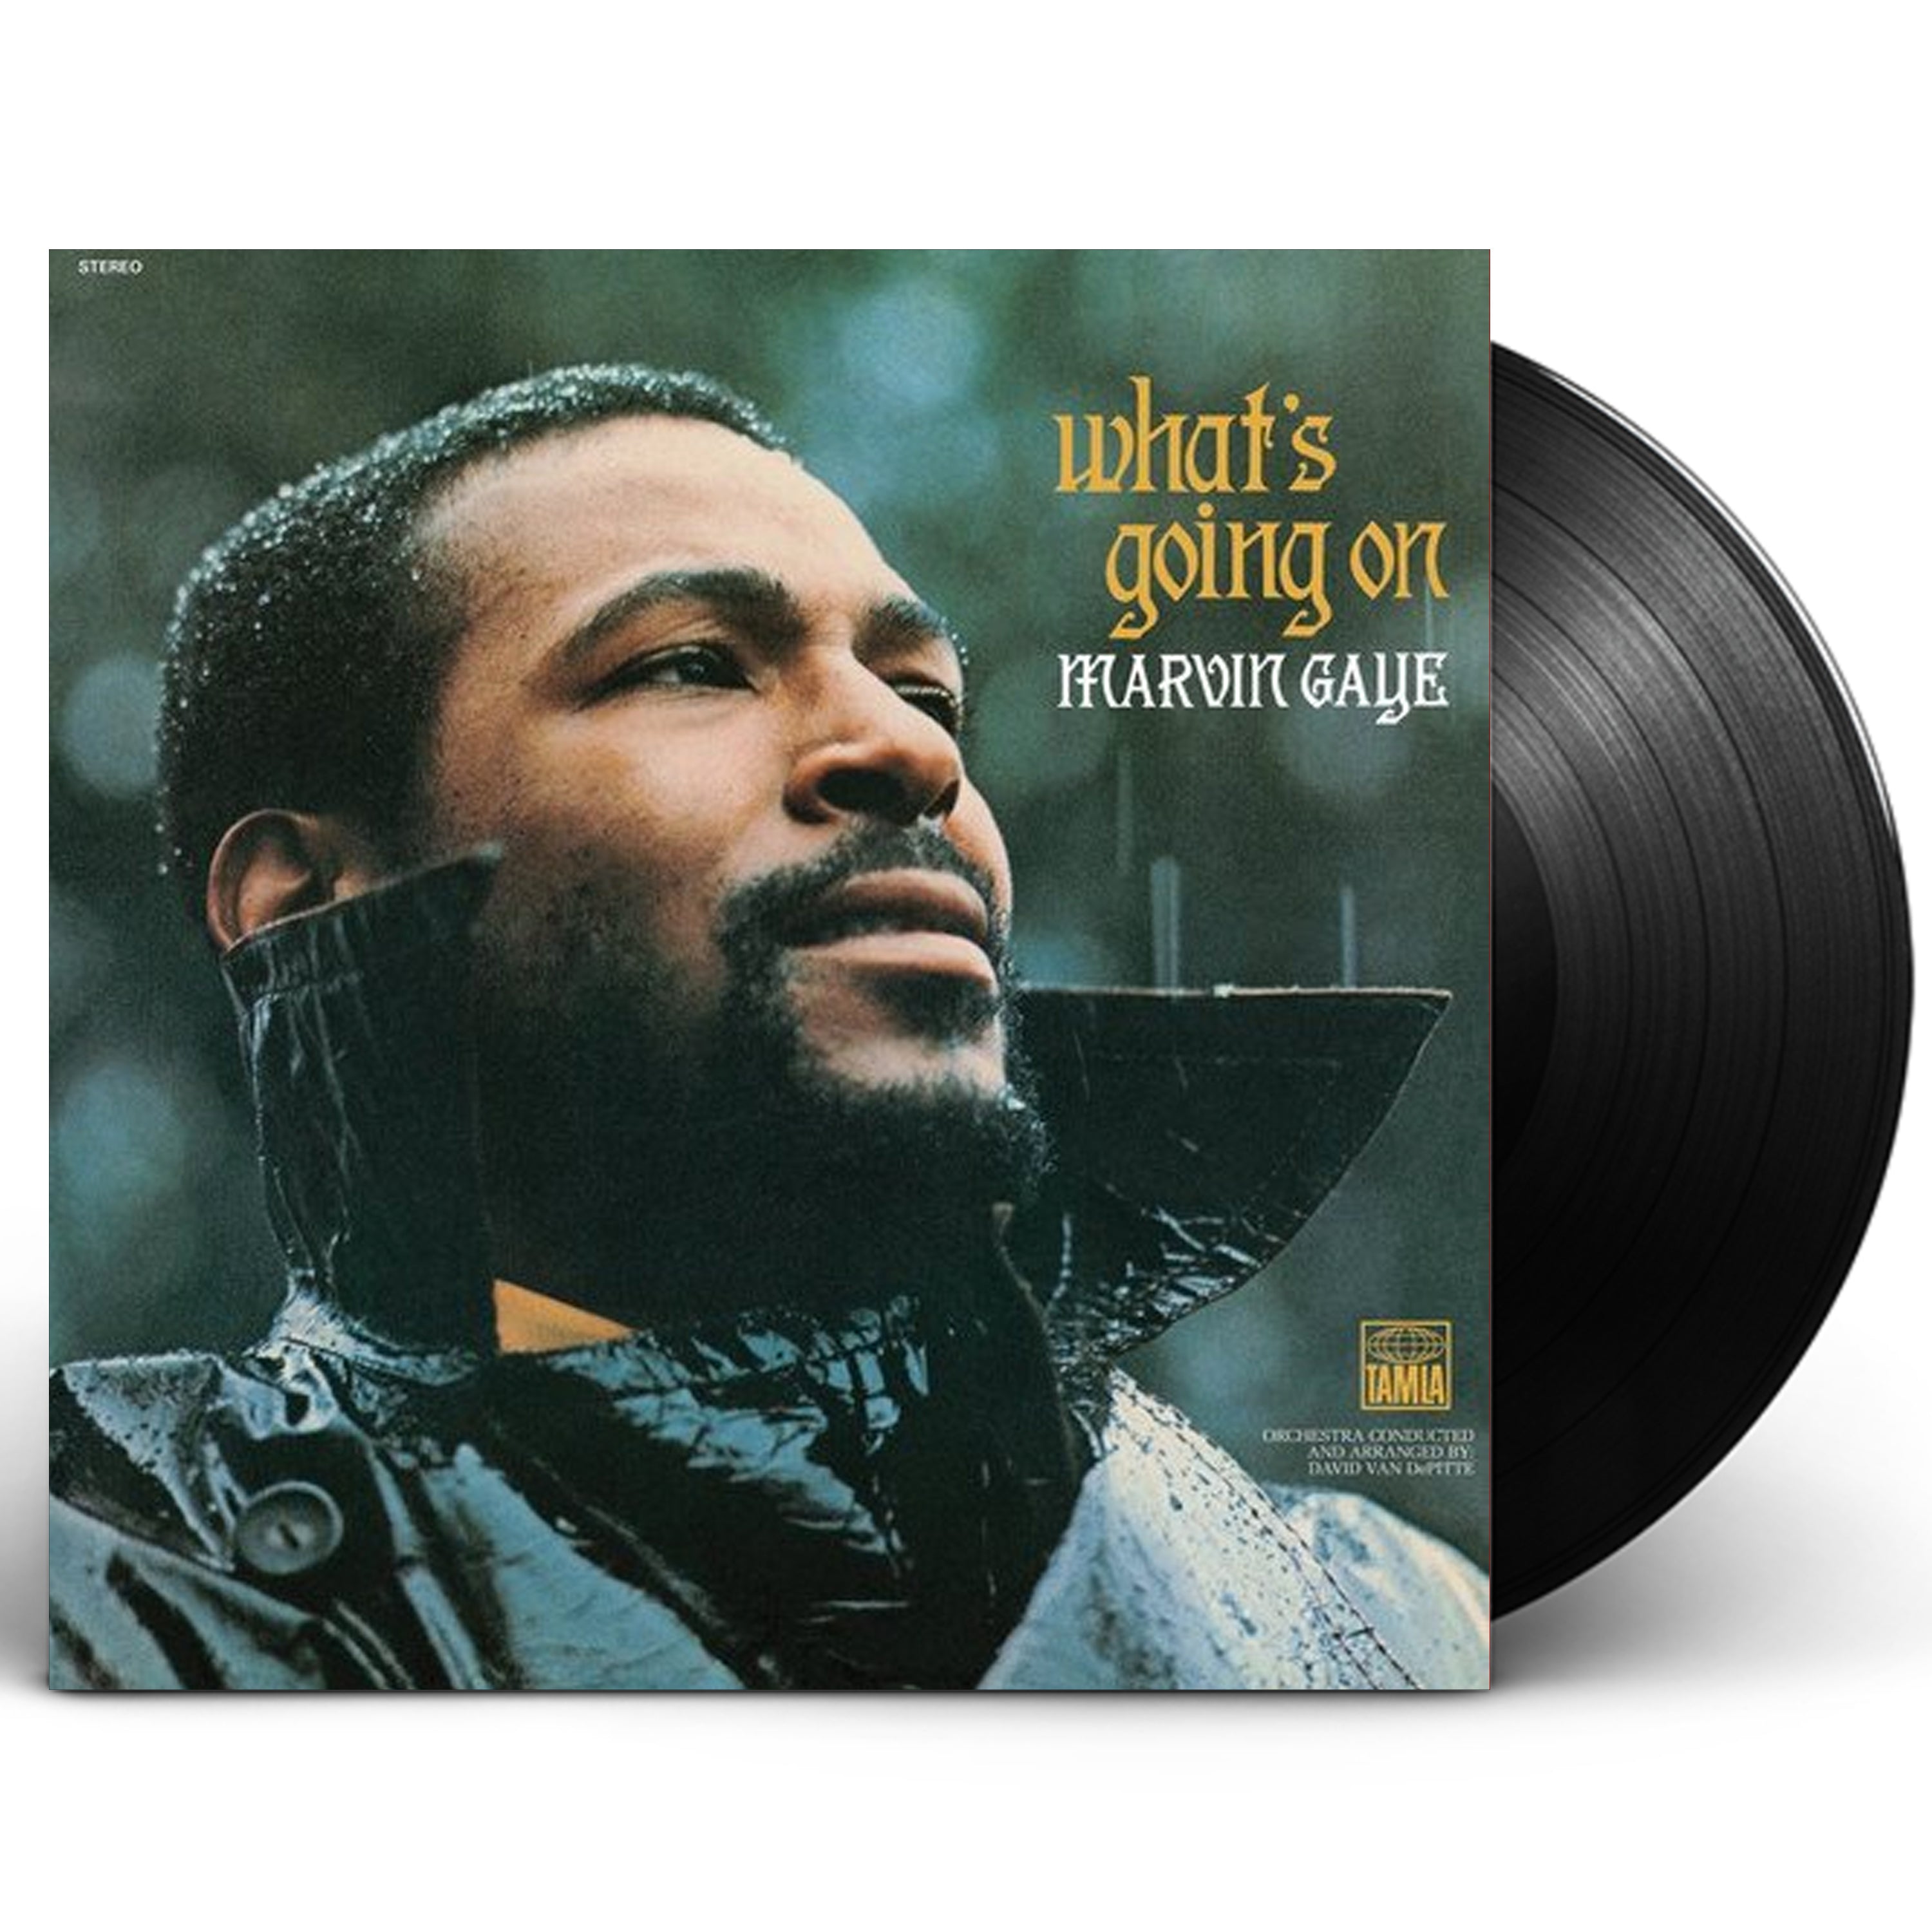 Marvin Gaye - What's Going On: Live [2 LP] -  Music